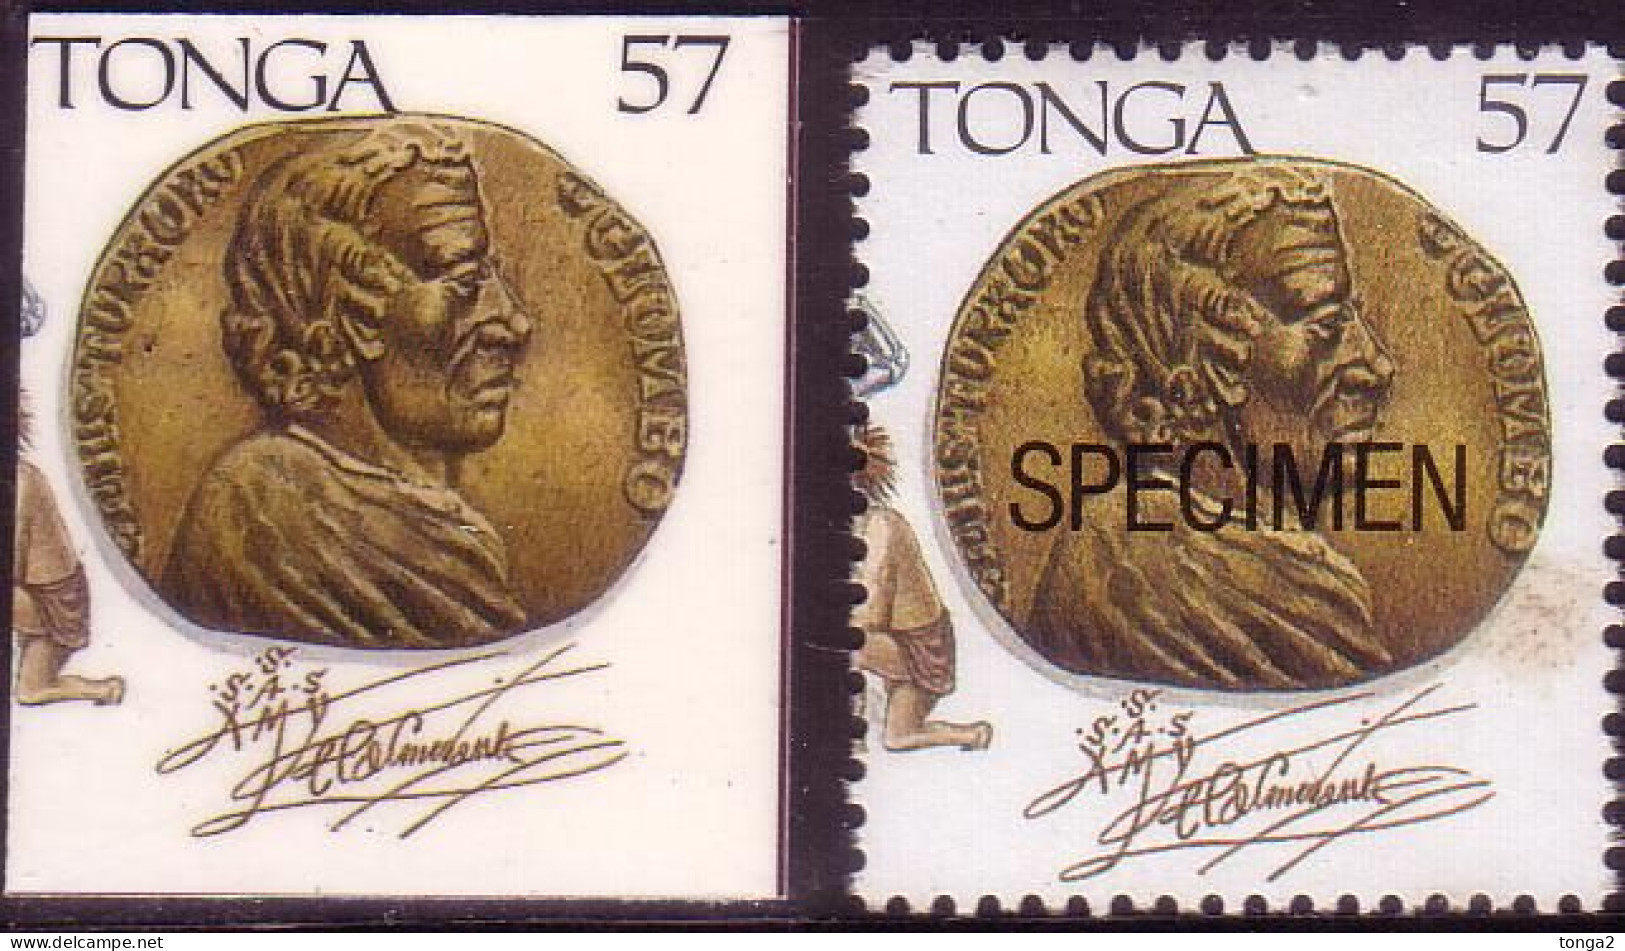 Tonga 1992 Cromalin Proof - Gold Medal Showing Columbus And His Signature - 4 Exist - Cristoforo Colombo